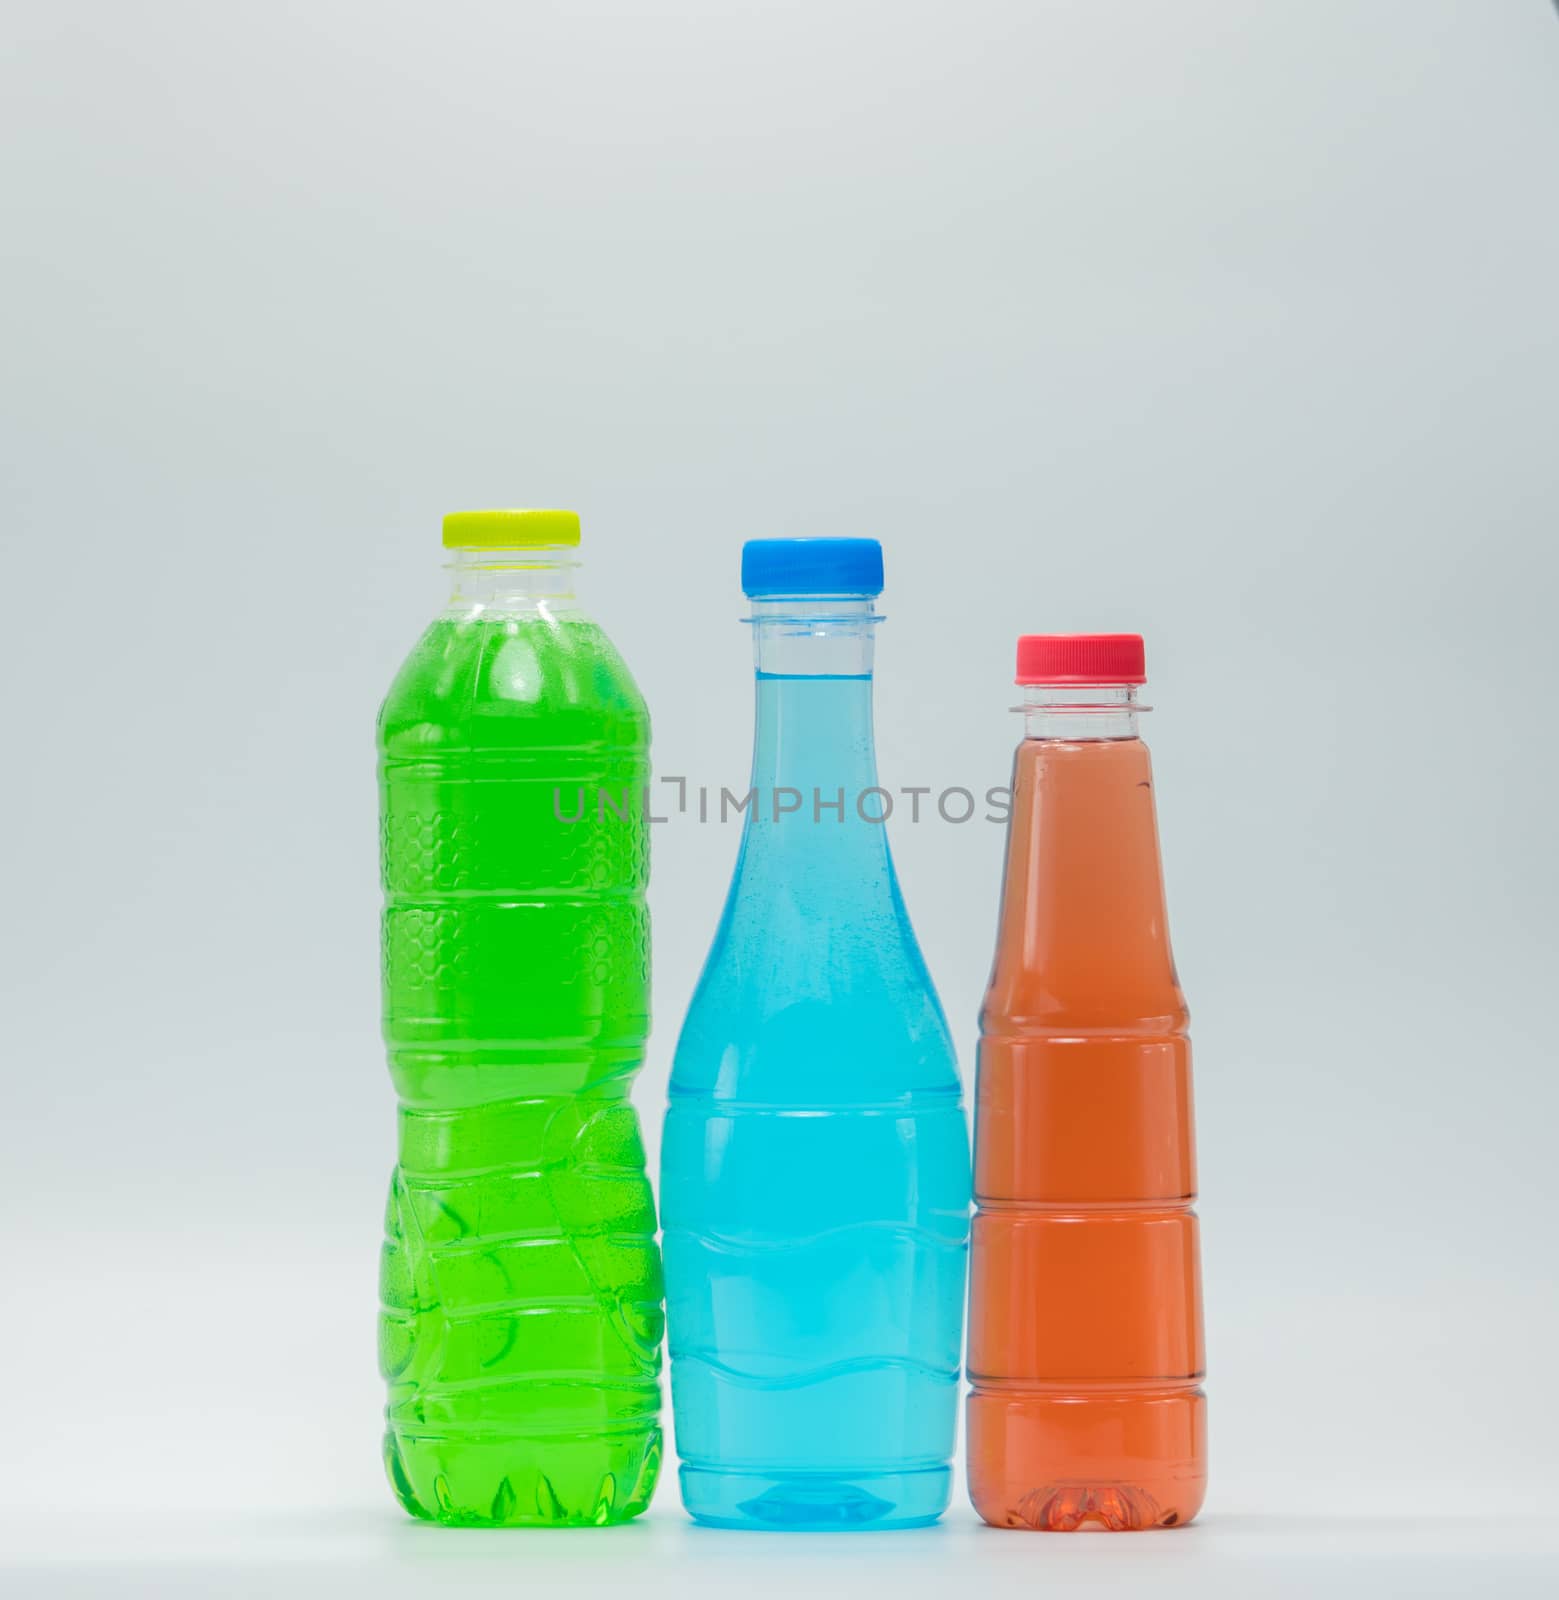 Three modern design bottles of soft drink on white background by Fahroni